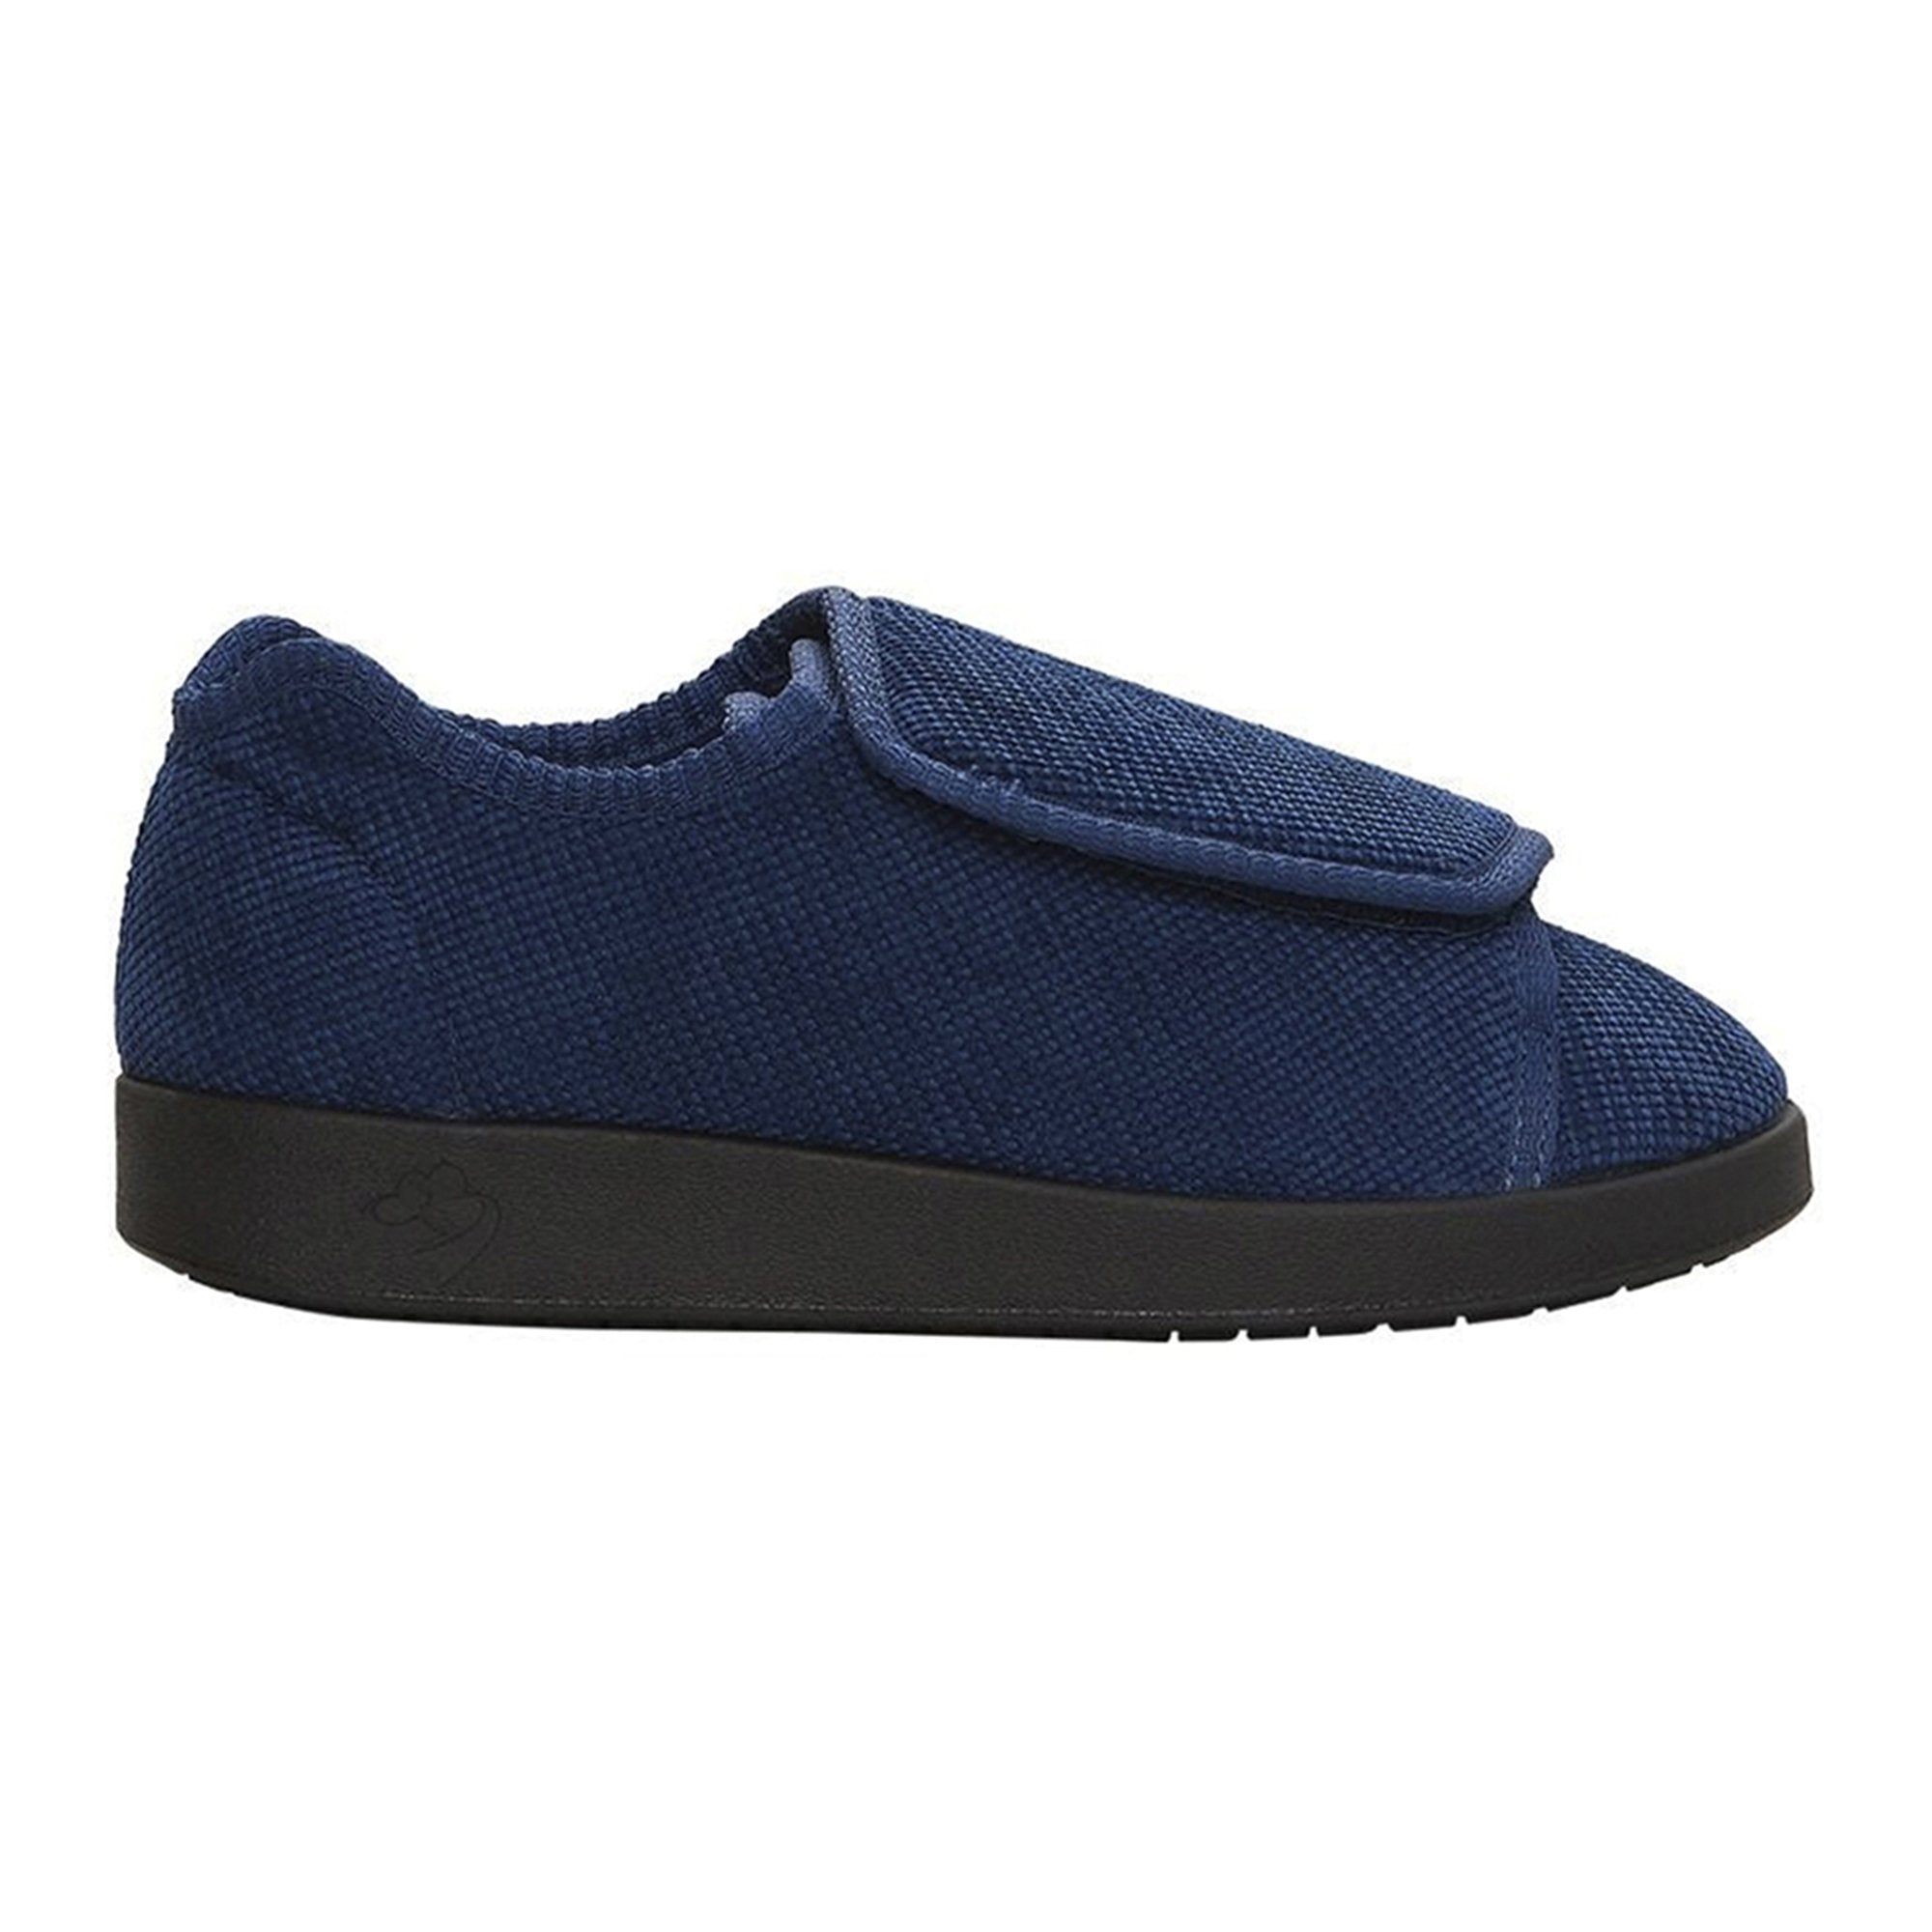 Slippers Silverts® Size 6 / 2X-Wide Navy Blue Easy Closure